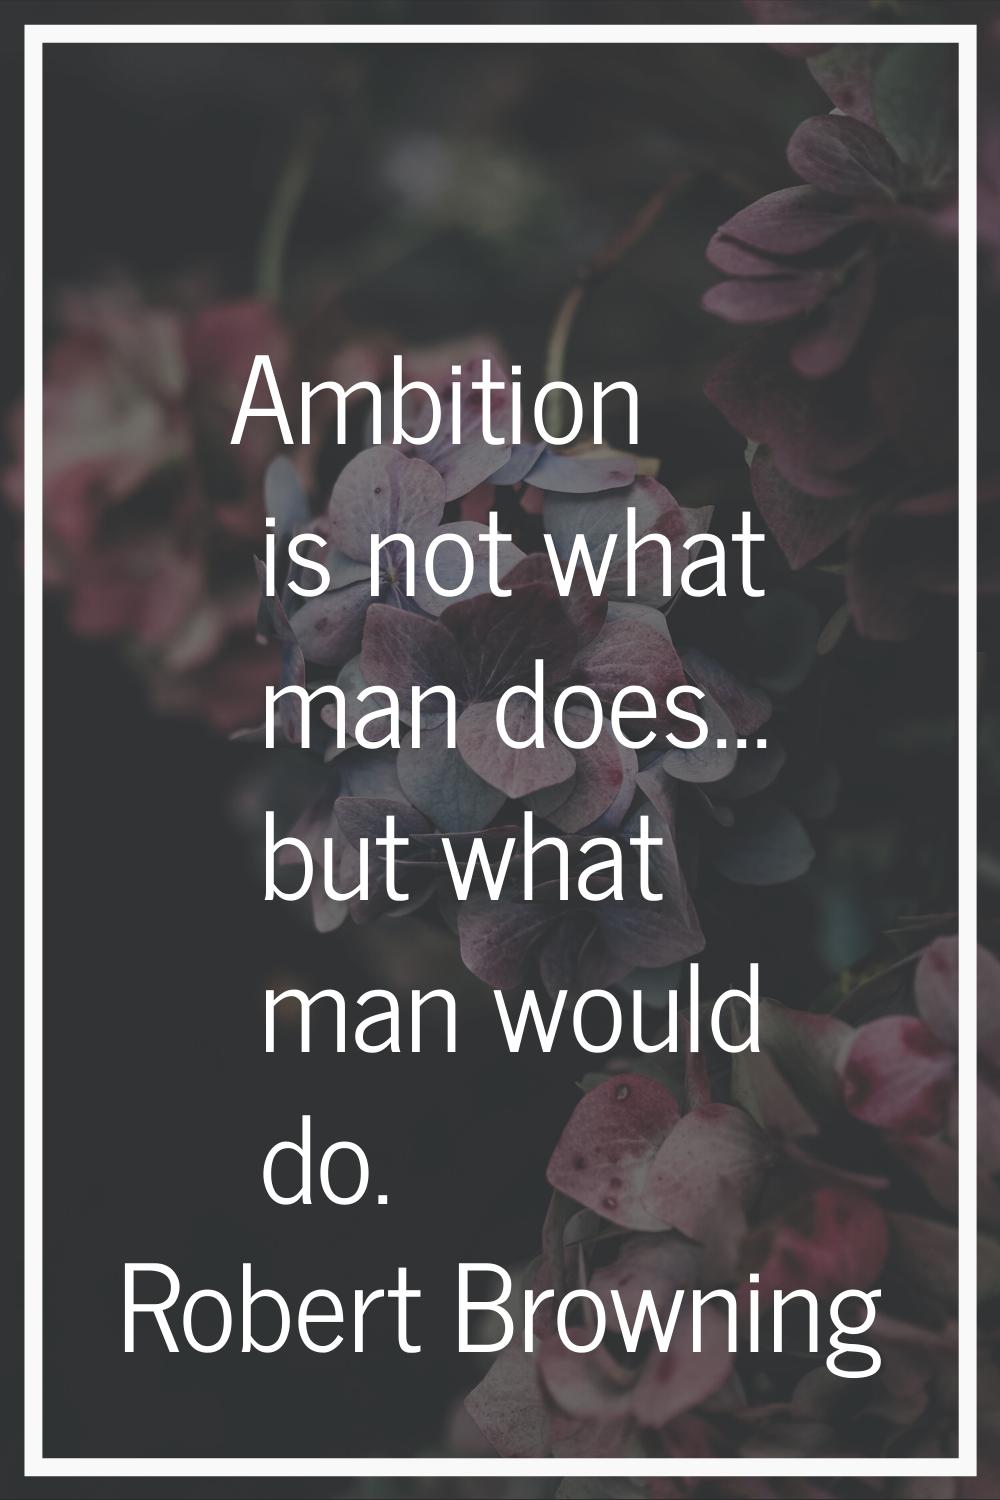 Ambition is not what man does... but what man would do.